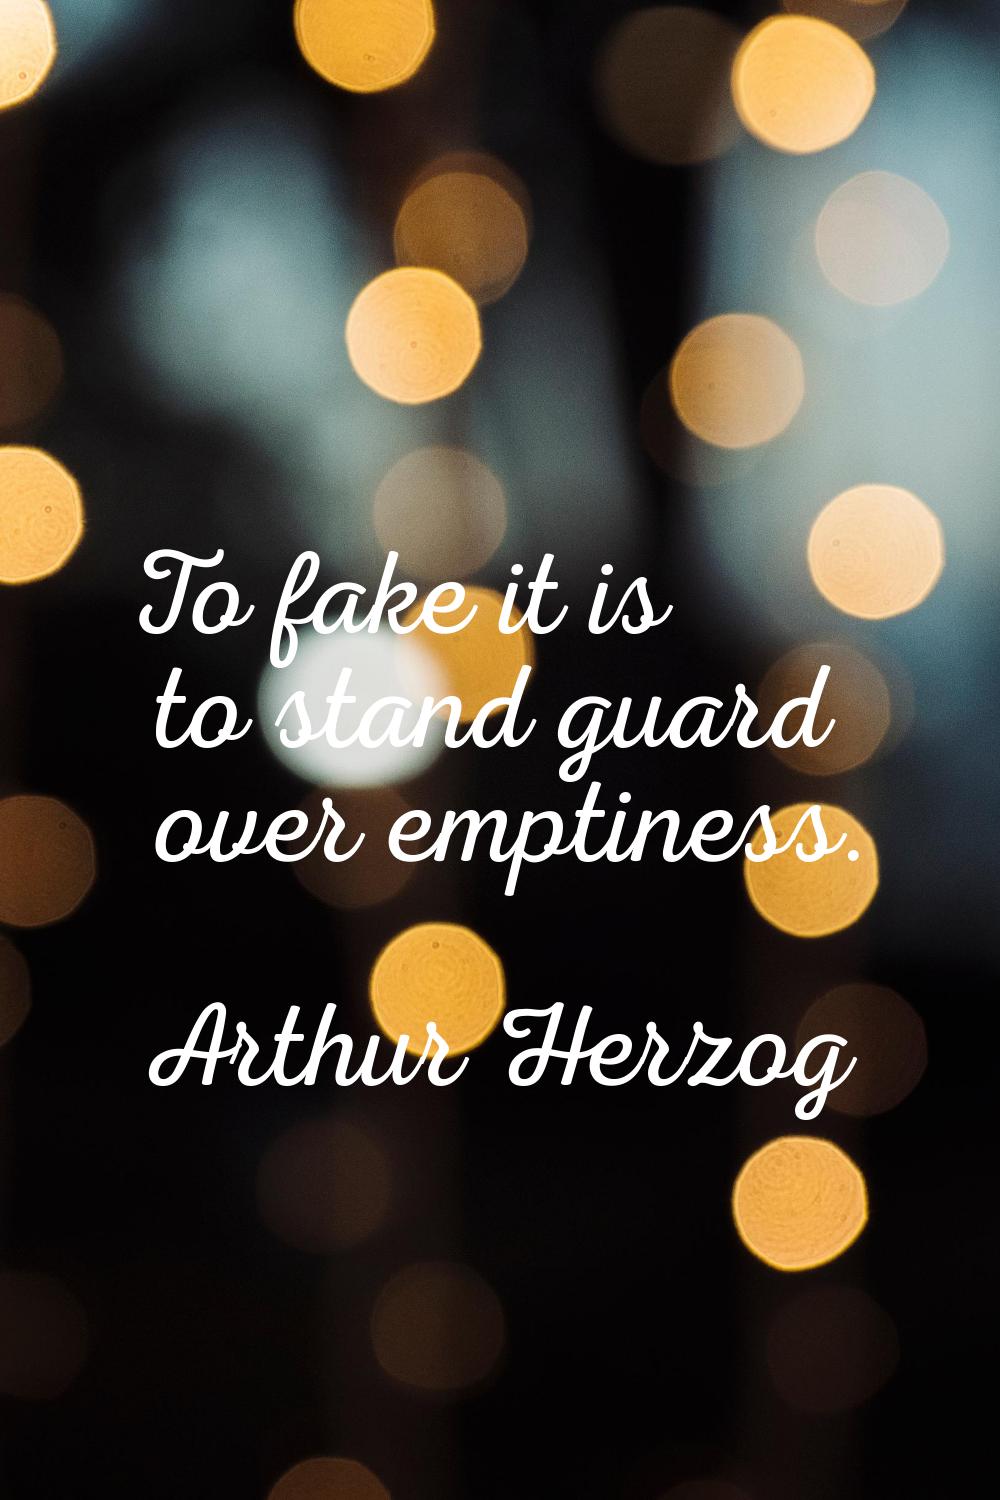 To fake it is to stand guard over emptiness.